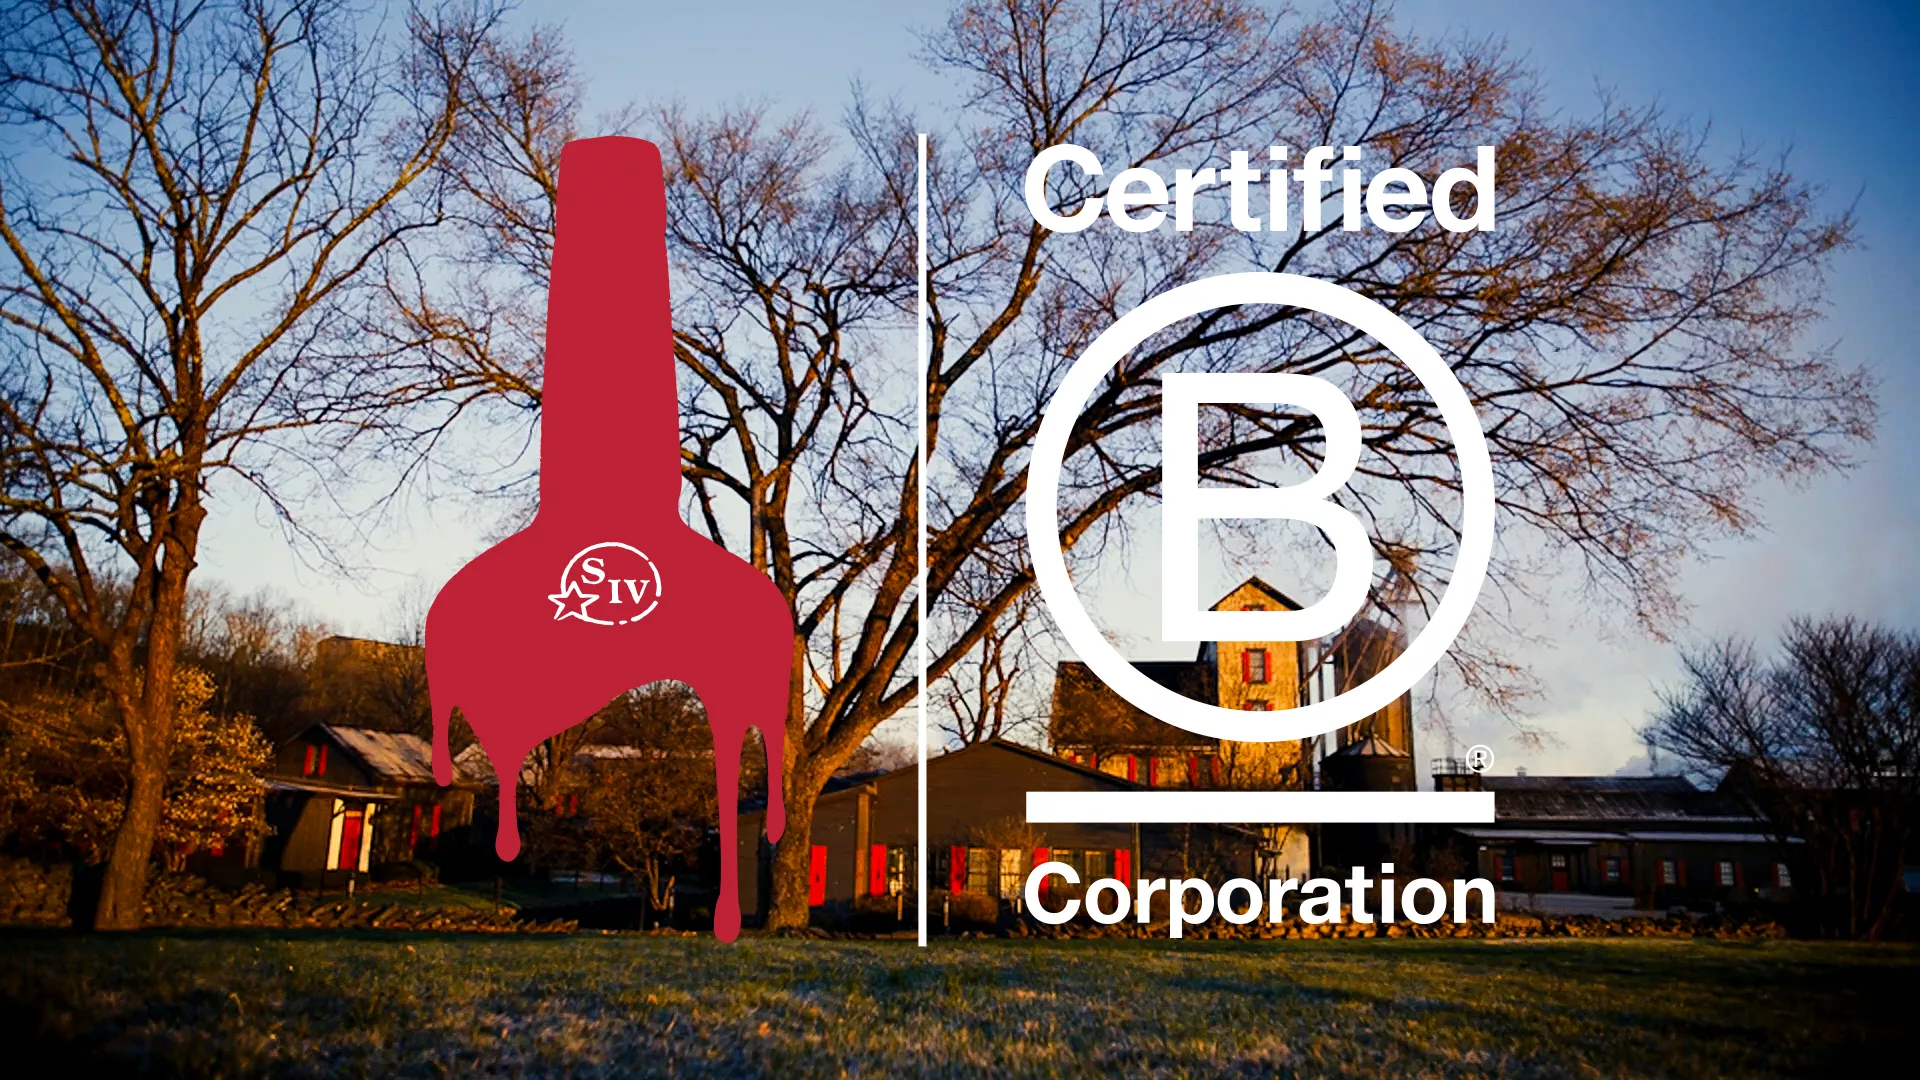 Maker's Mark "Certified B" corporation logo and seal